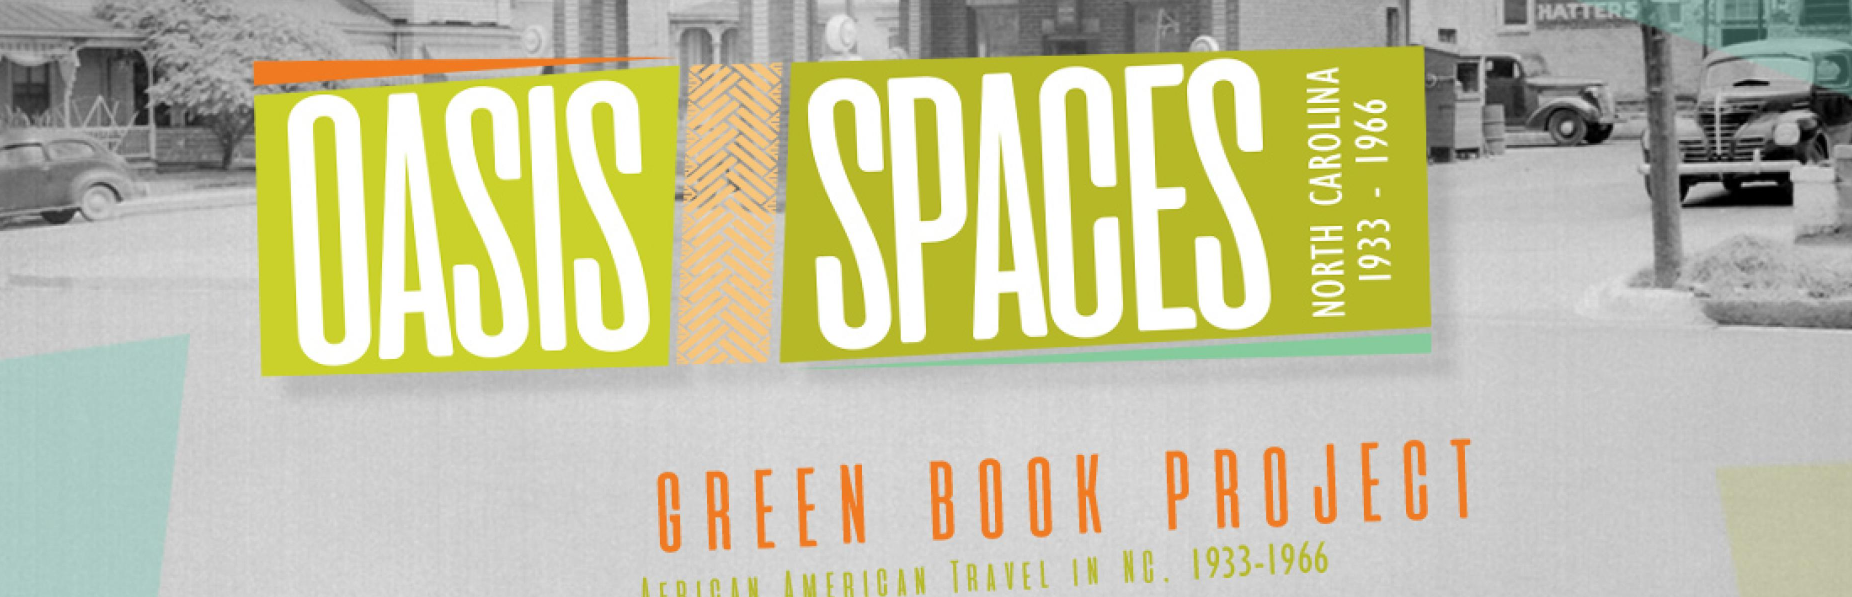 Oasis Spaces Banner.